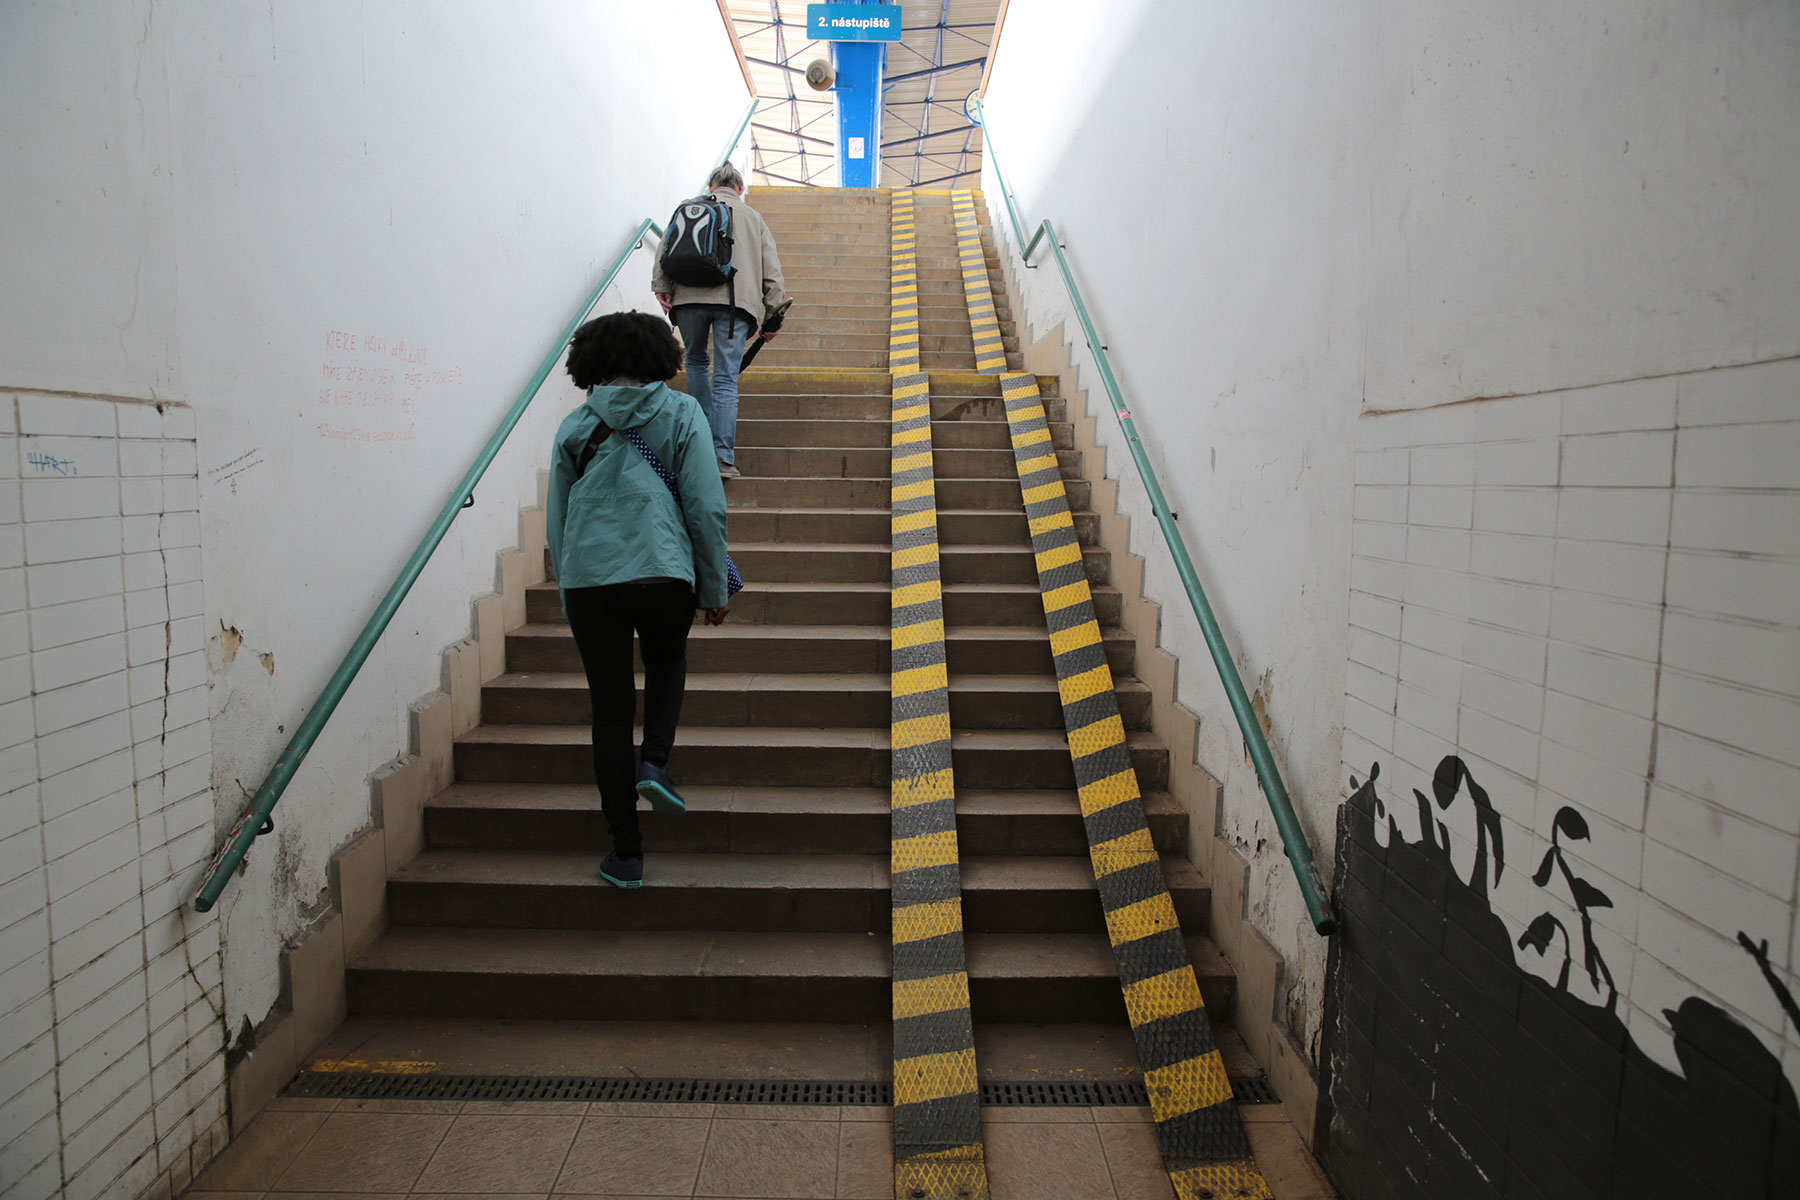 Technical Penguins Web Accessibility Guide: An image of a tall staircase covering at least two floors is visible in a public space. The backs of two people ascending the stairs are visible at left. No elevator or other automated technology is visible; instead, two thin tracks are laid over the right side of the staircase, about as far apart as the wheels on a wheelchair, making a very steep ramp.